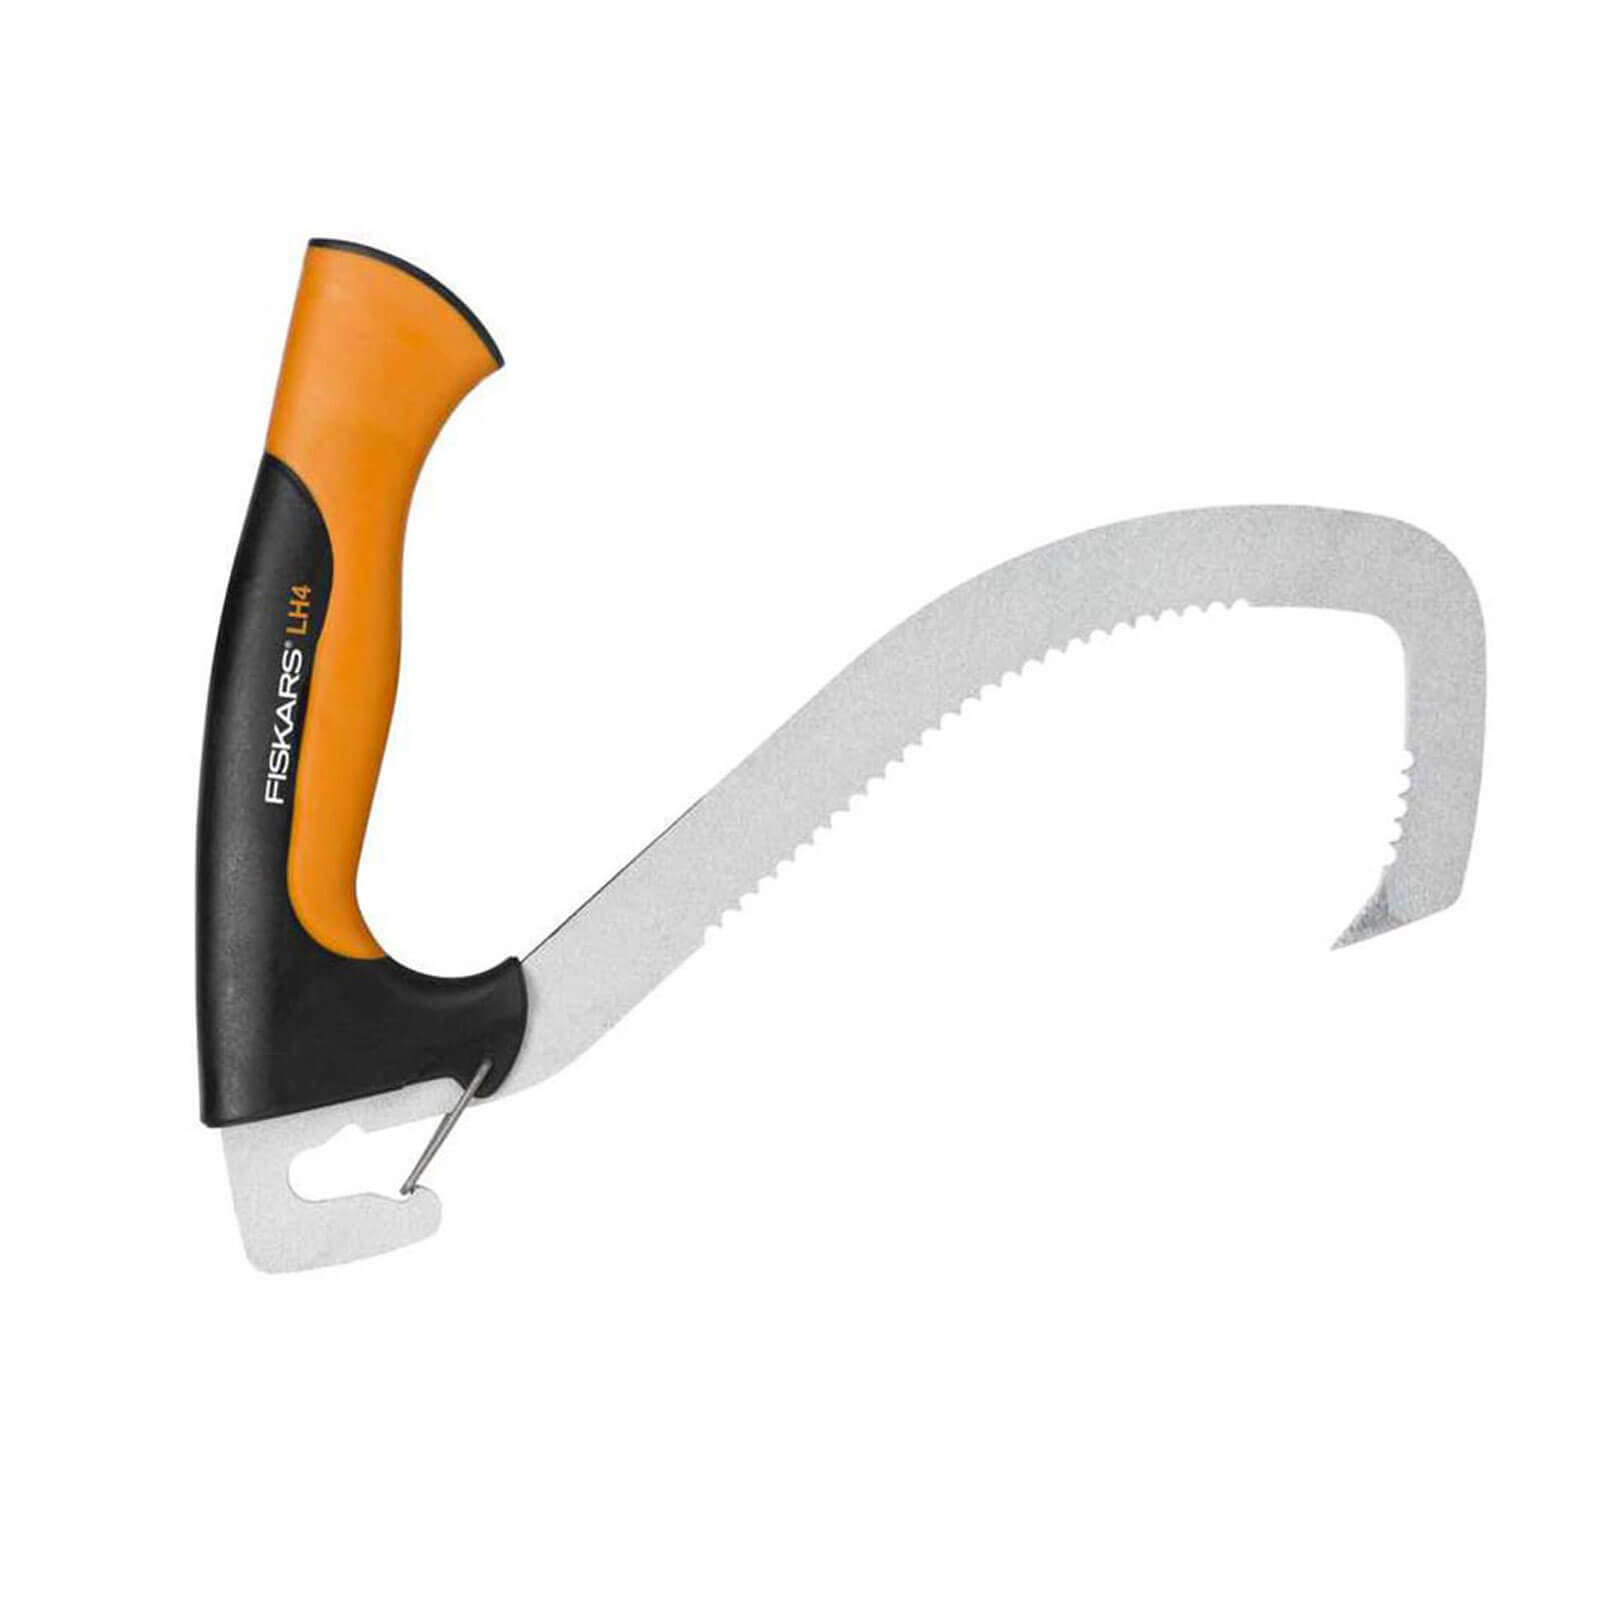 Image of Fiskars LH4 WoodXpert Log Hook for Lifting and Transporting Logs